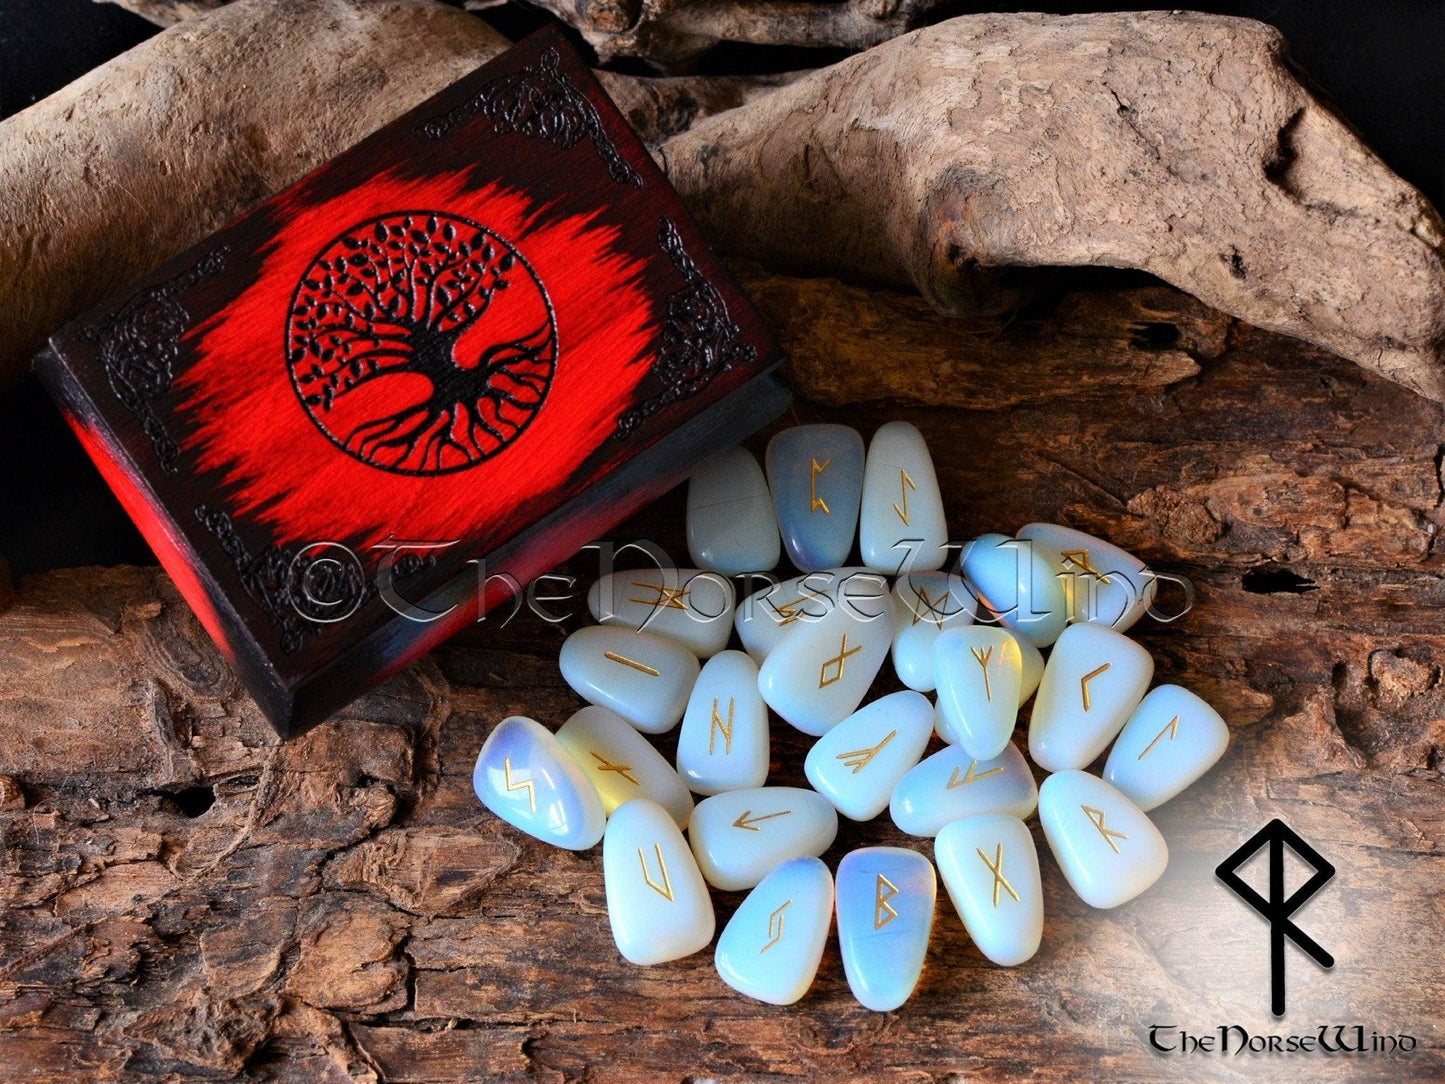 Yggdrasil Rune Stones Set in Red Wooden Box - Obsidian/Opalite/Hematite, Witchcraft Kit, Witch Altar Kit, Magickal Runes Box Viking Decor - TheNorseWind